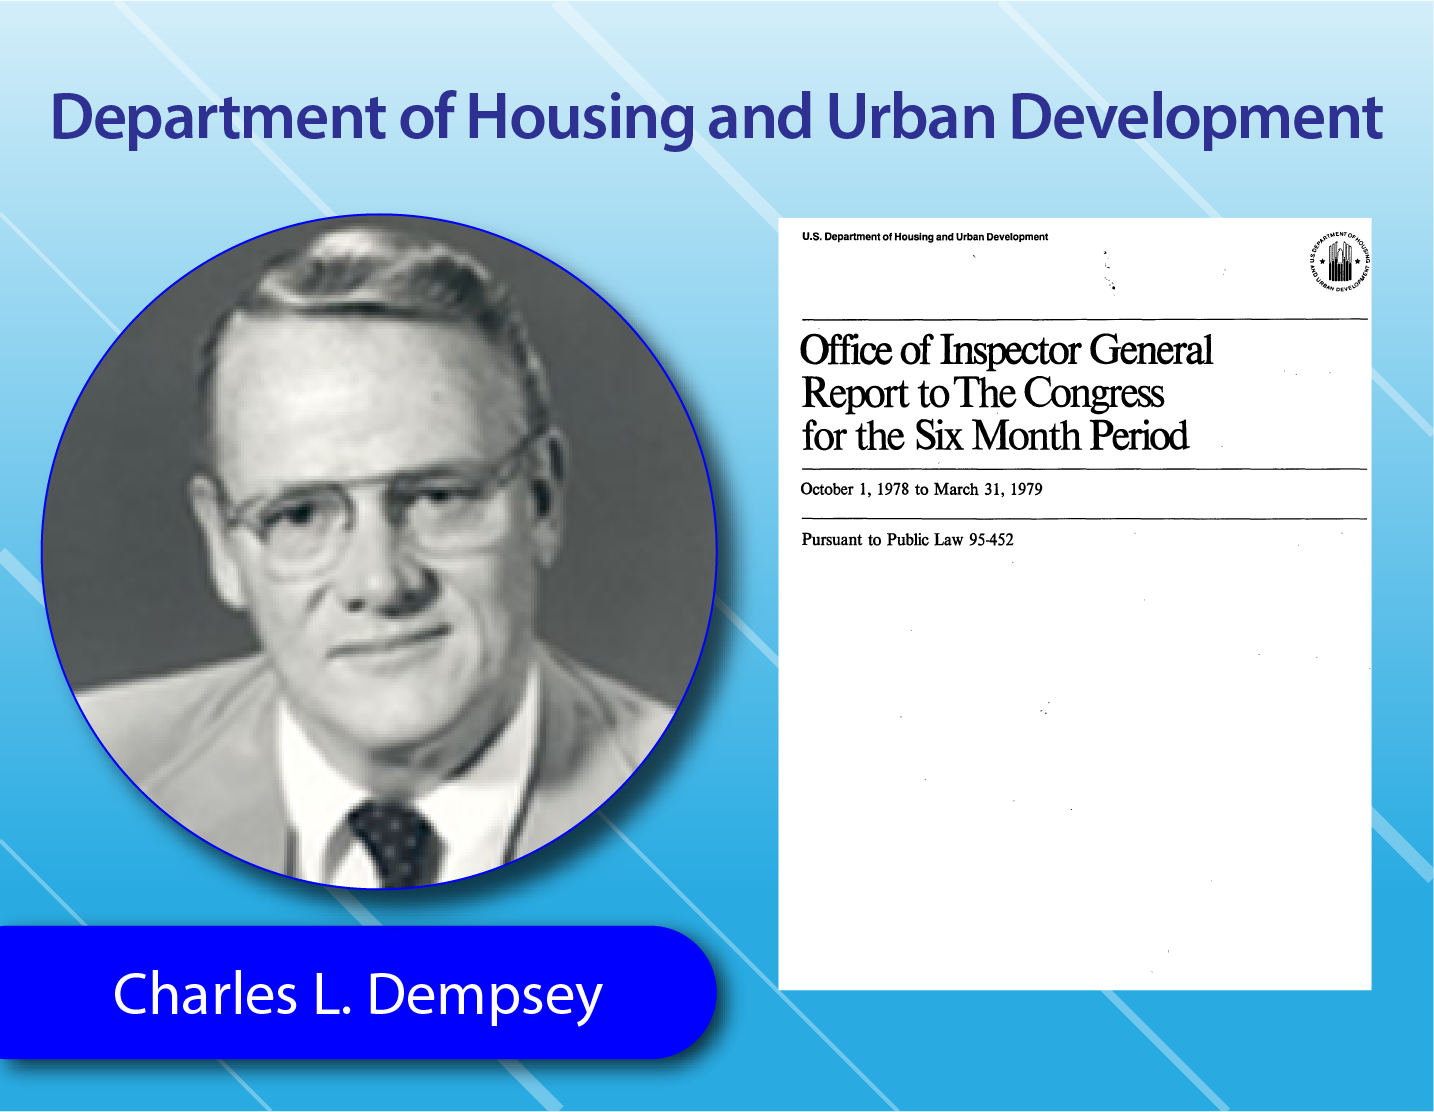 Department of Housing and Urban Development - Charles L. Dempsey